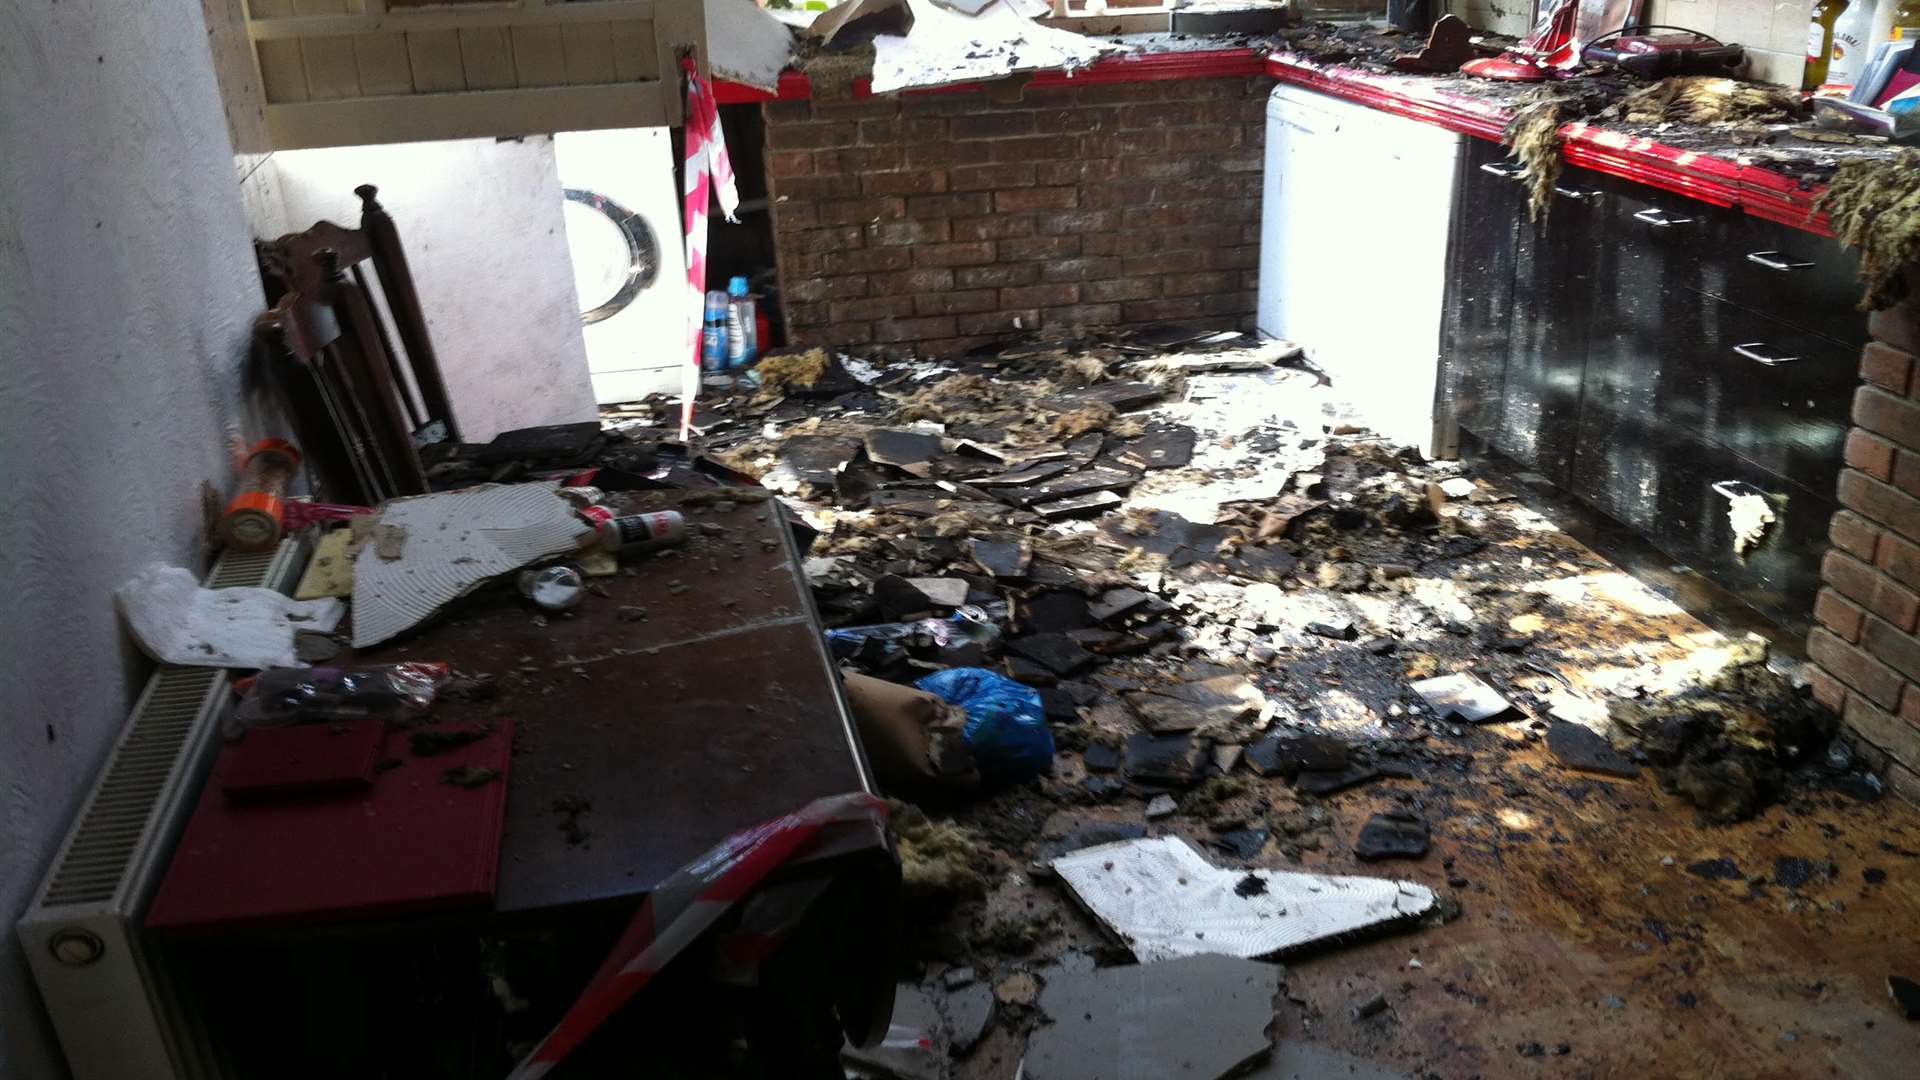 Damage inside the house next door, owned by Martin Parkinson